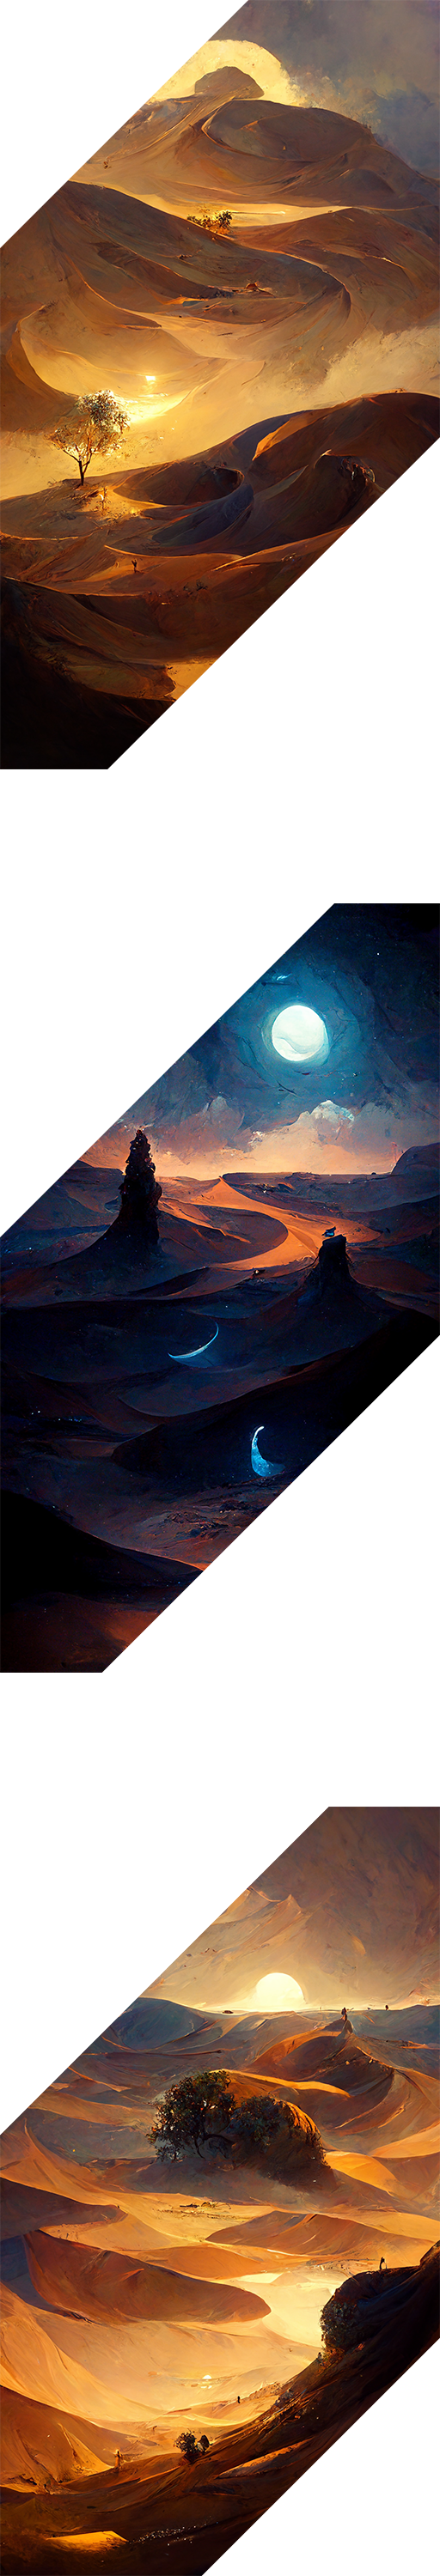 Three images of a desert landscape at sunset, night, and sunrise.